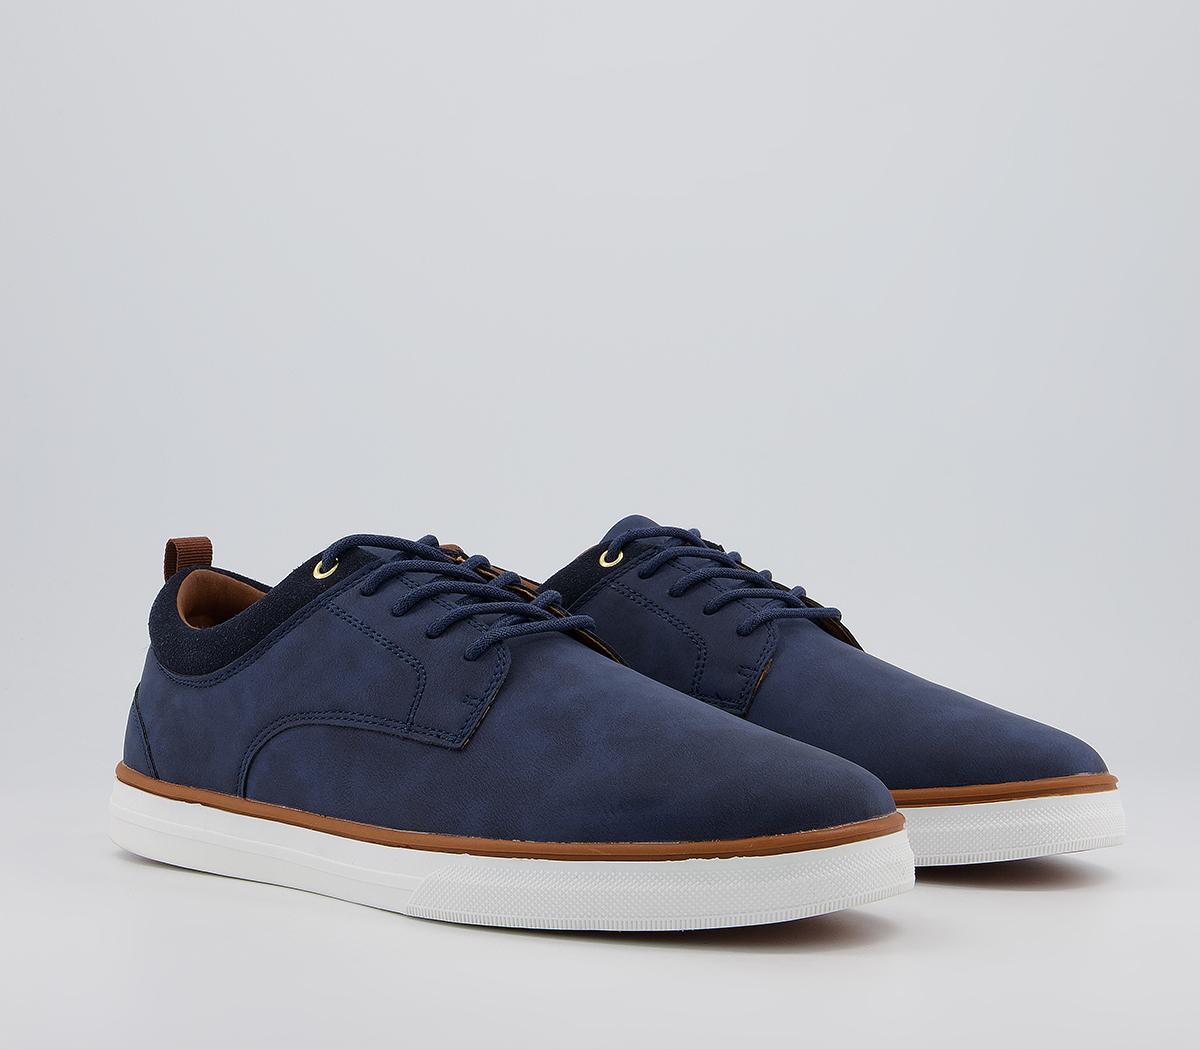 Office Camacho Low Sneakers Navy - Men's Casual Shoes